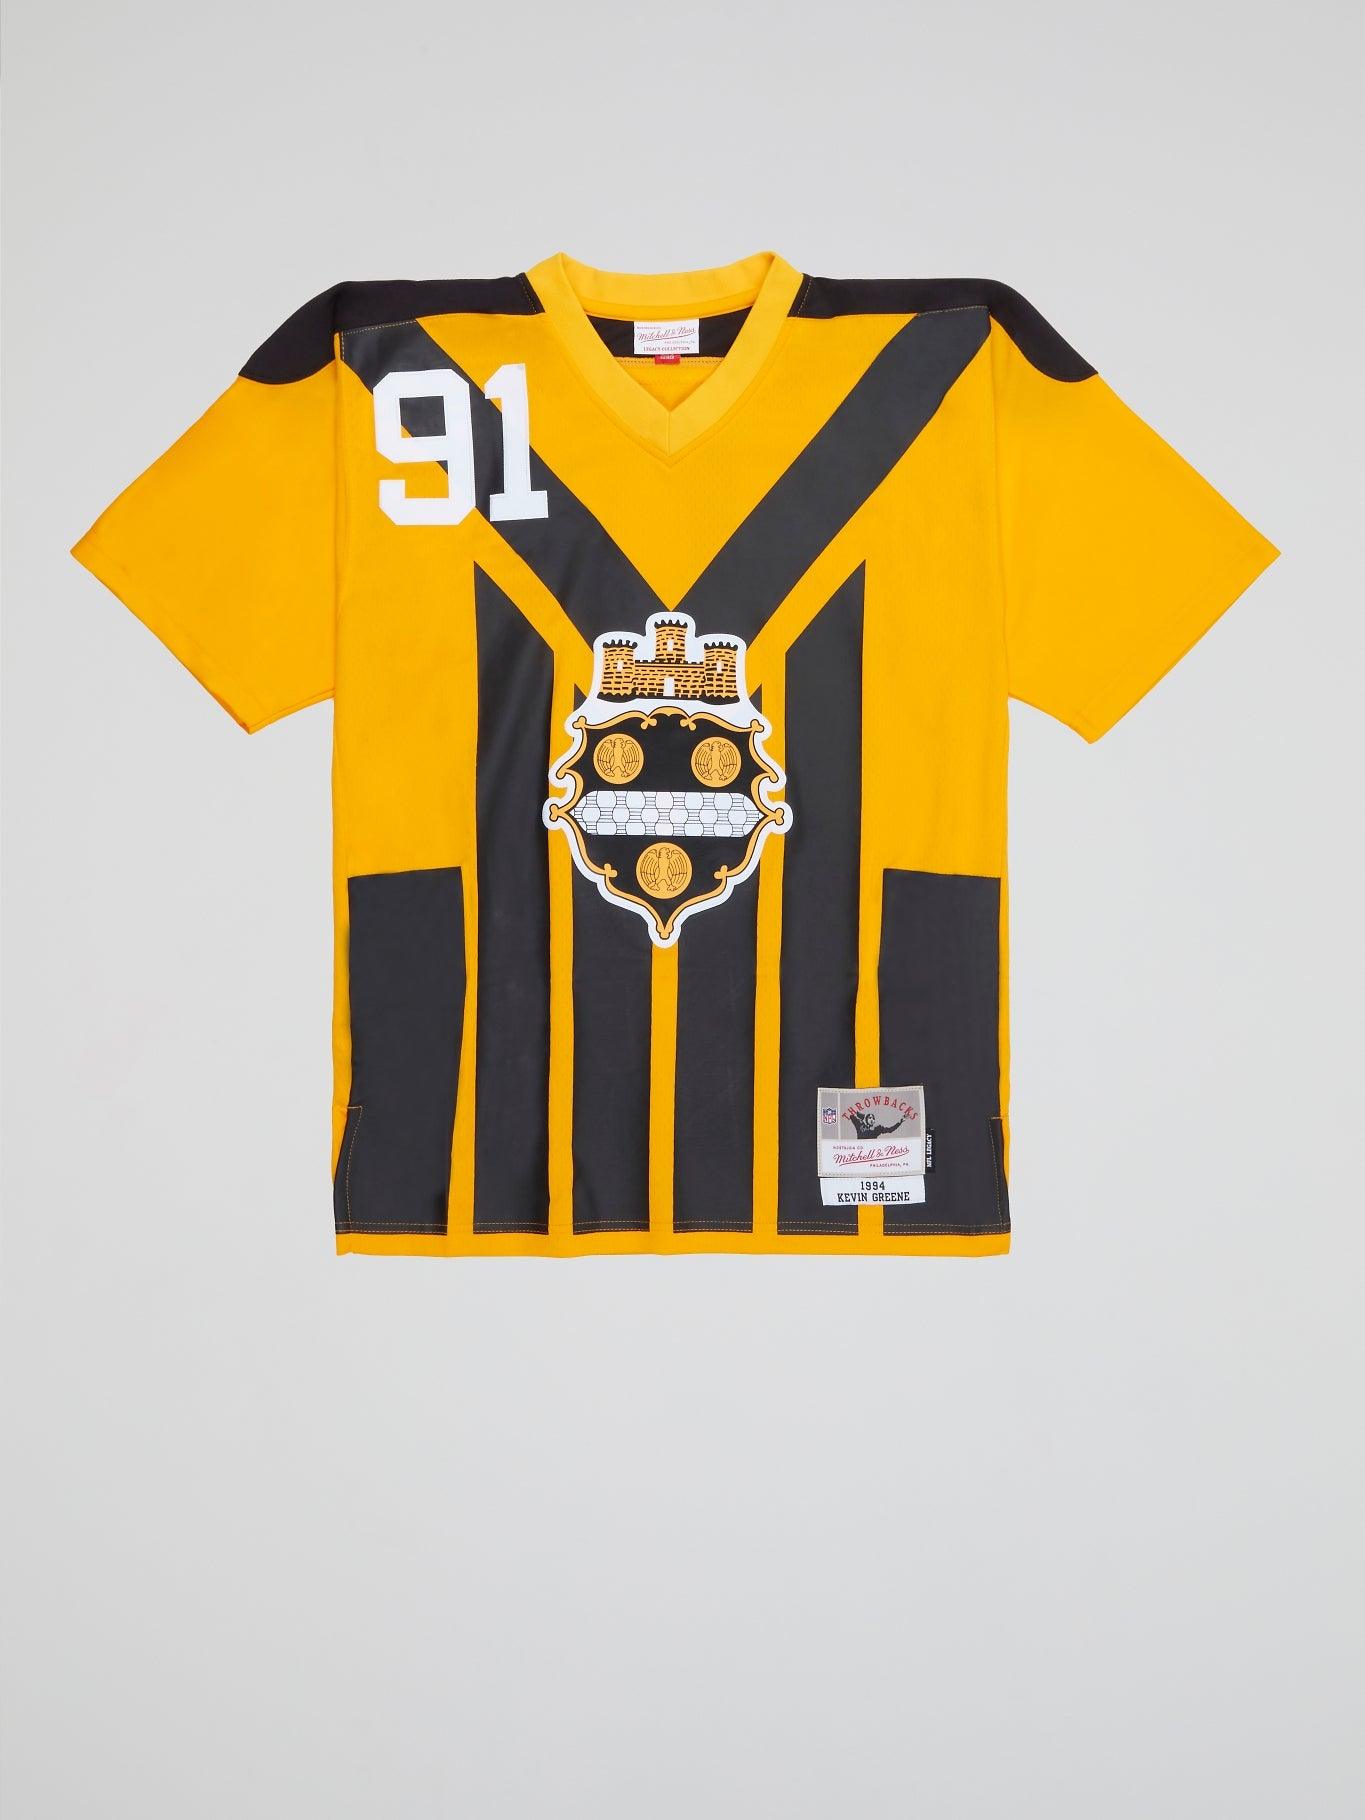 NFL Legacy Jersey Steelers 94 Kevin Greene - B-Hype Society